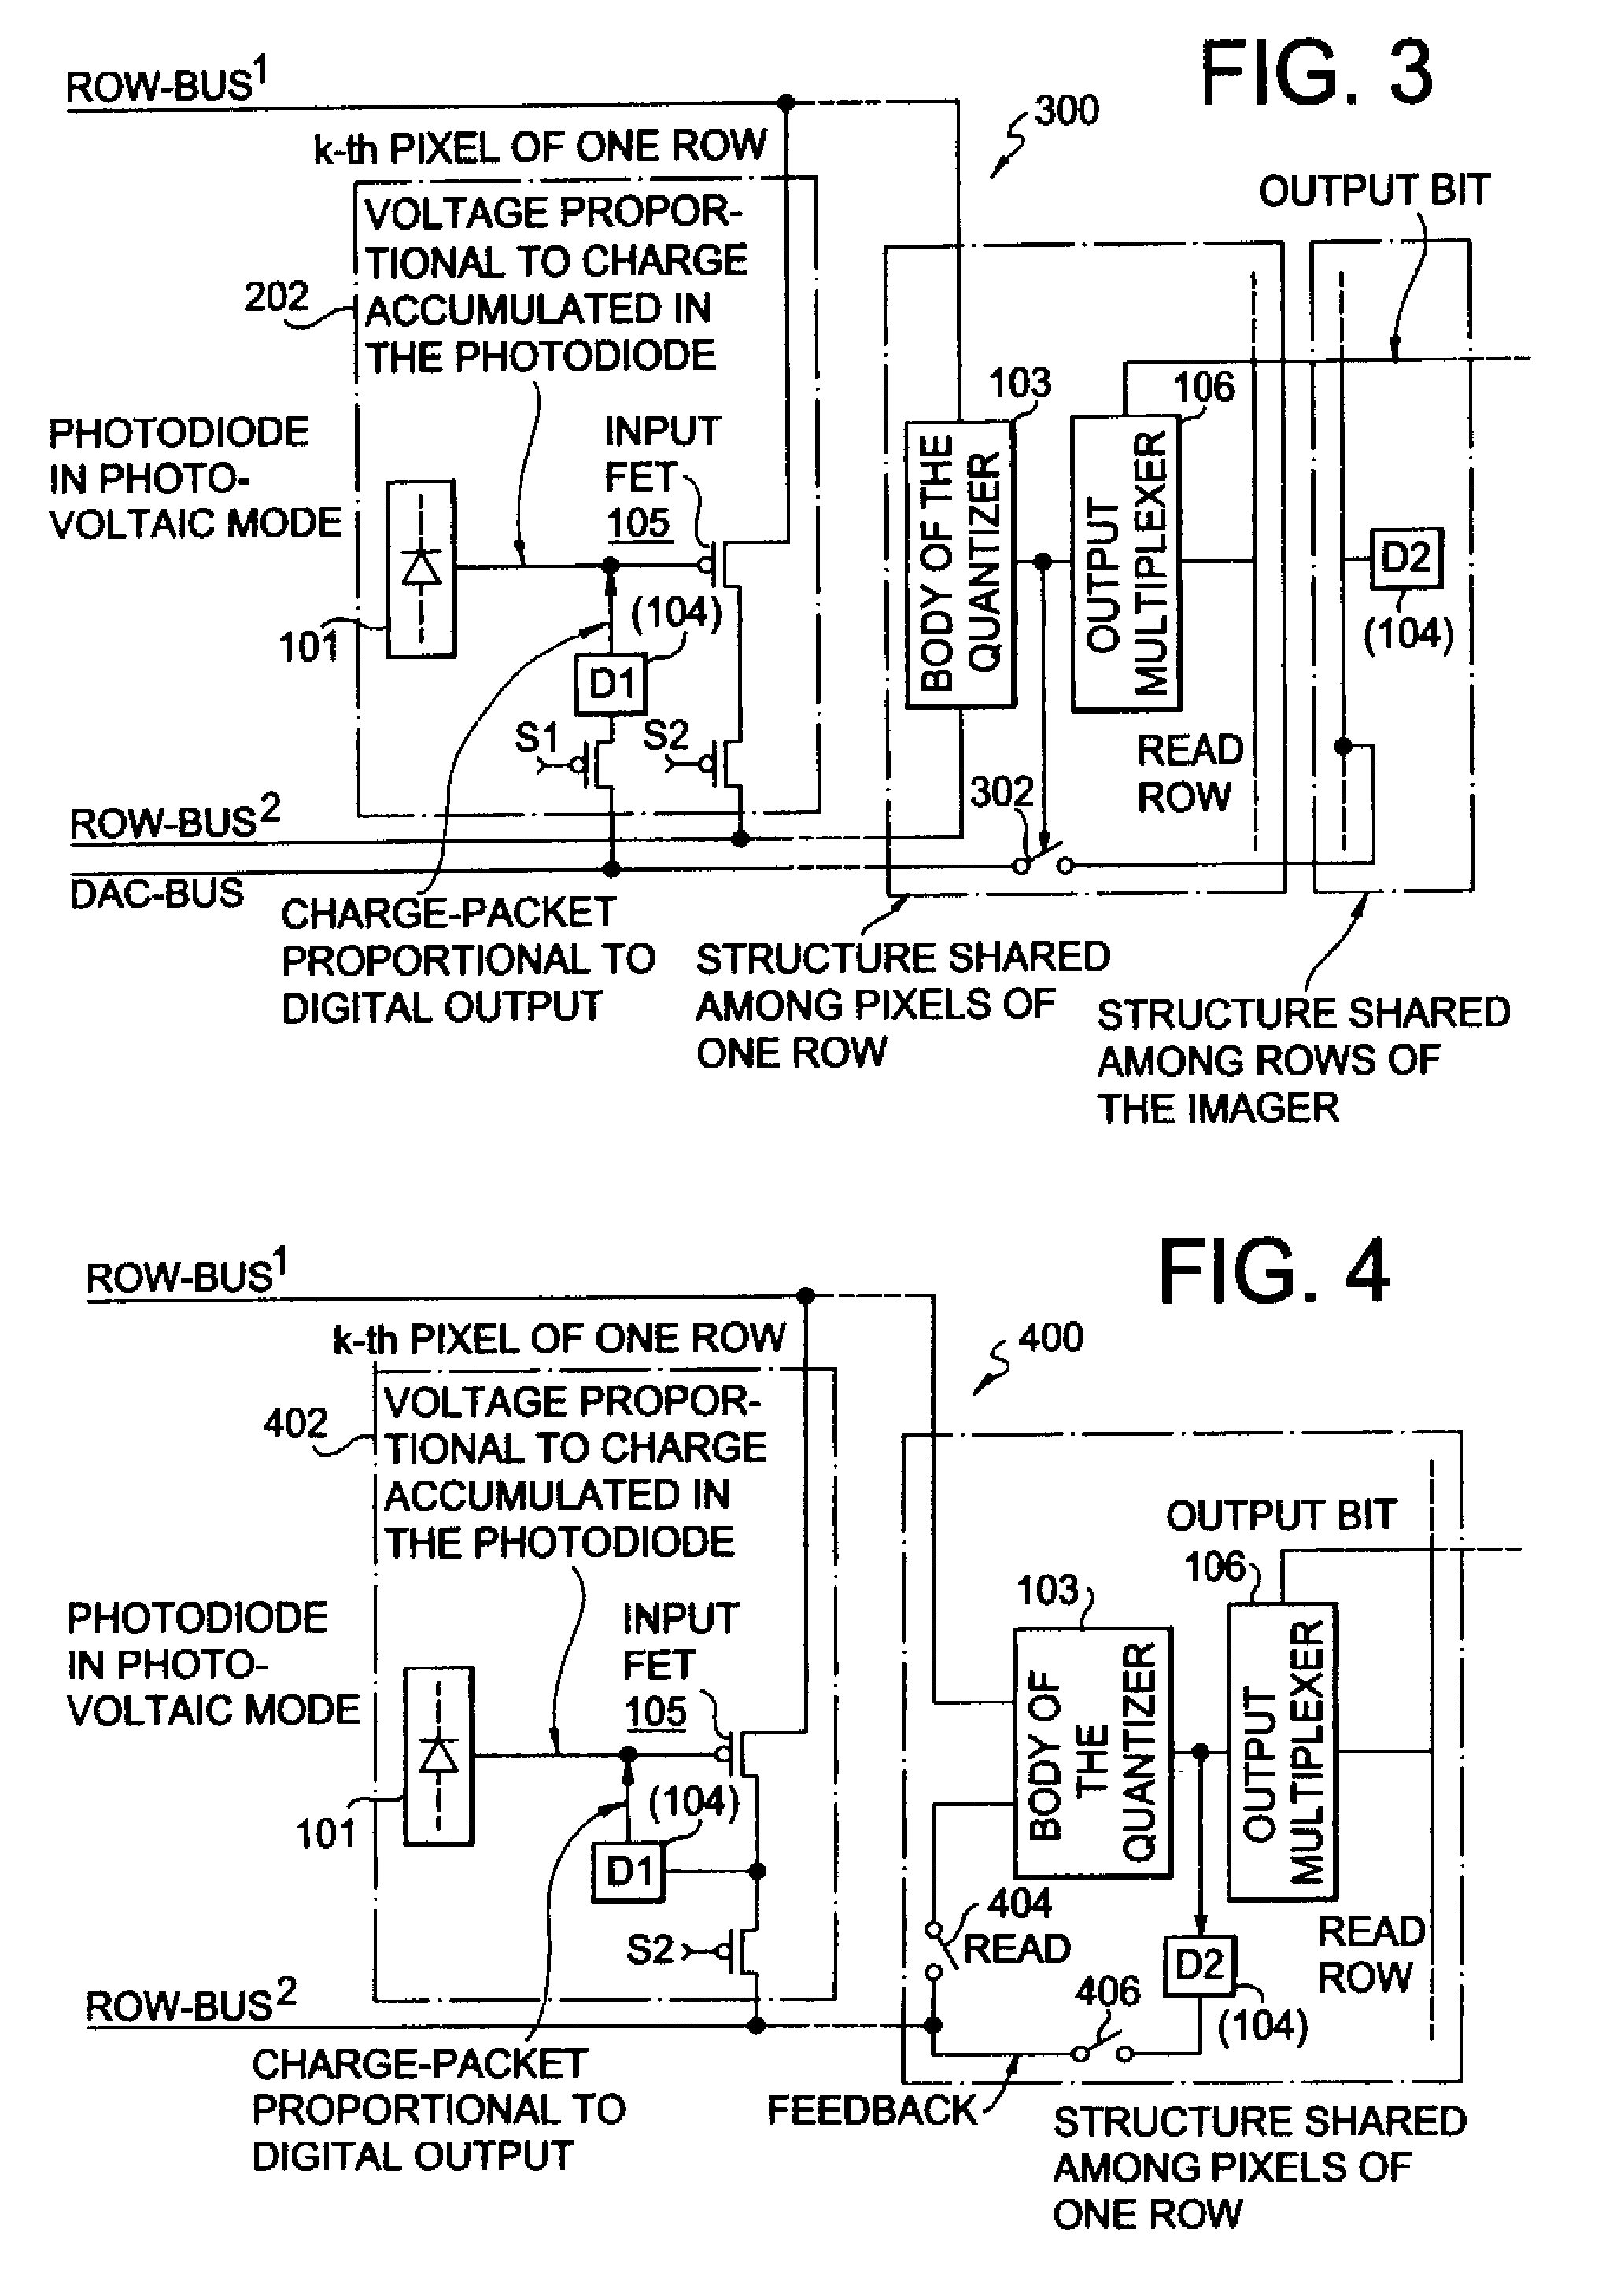 Multiplexed-input-separated Sigma-Delta analog-to-digital converter for pixel-level analog-to-digital conversion utilizing a feedback DAC separation